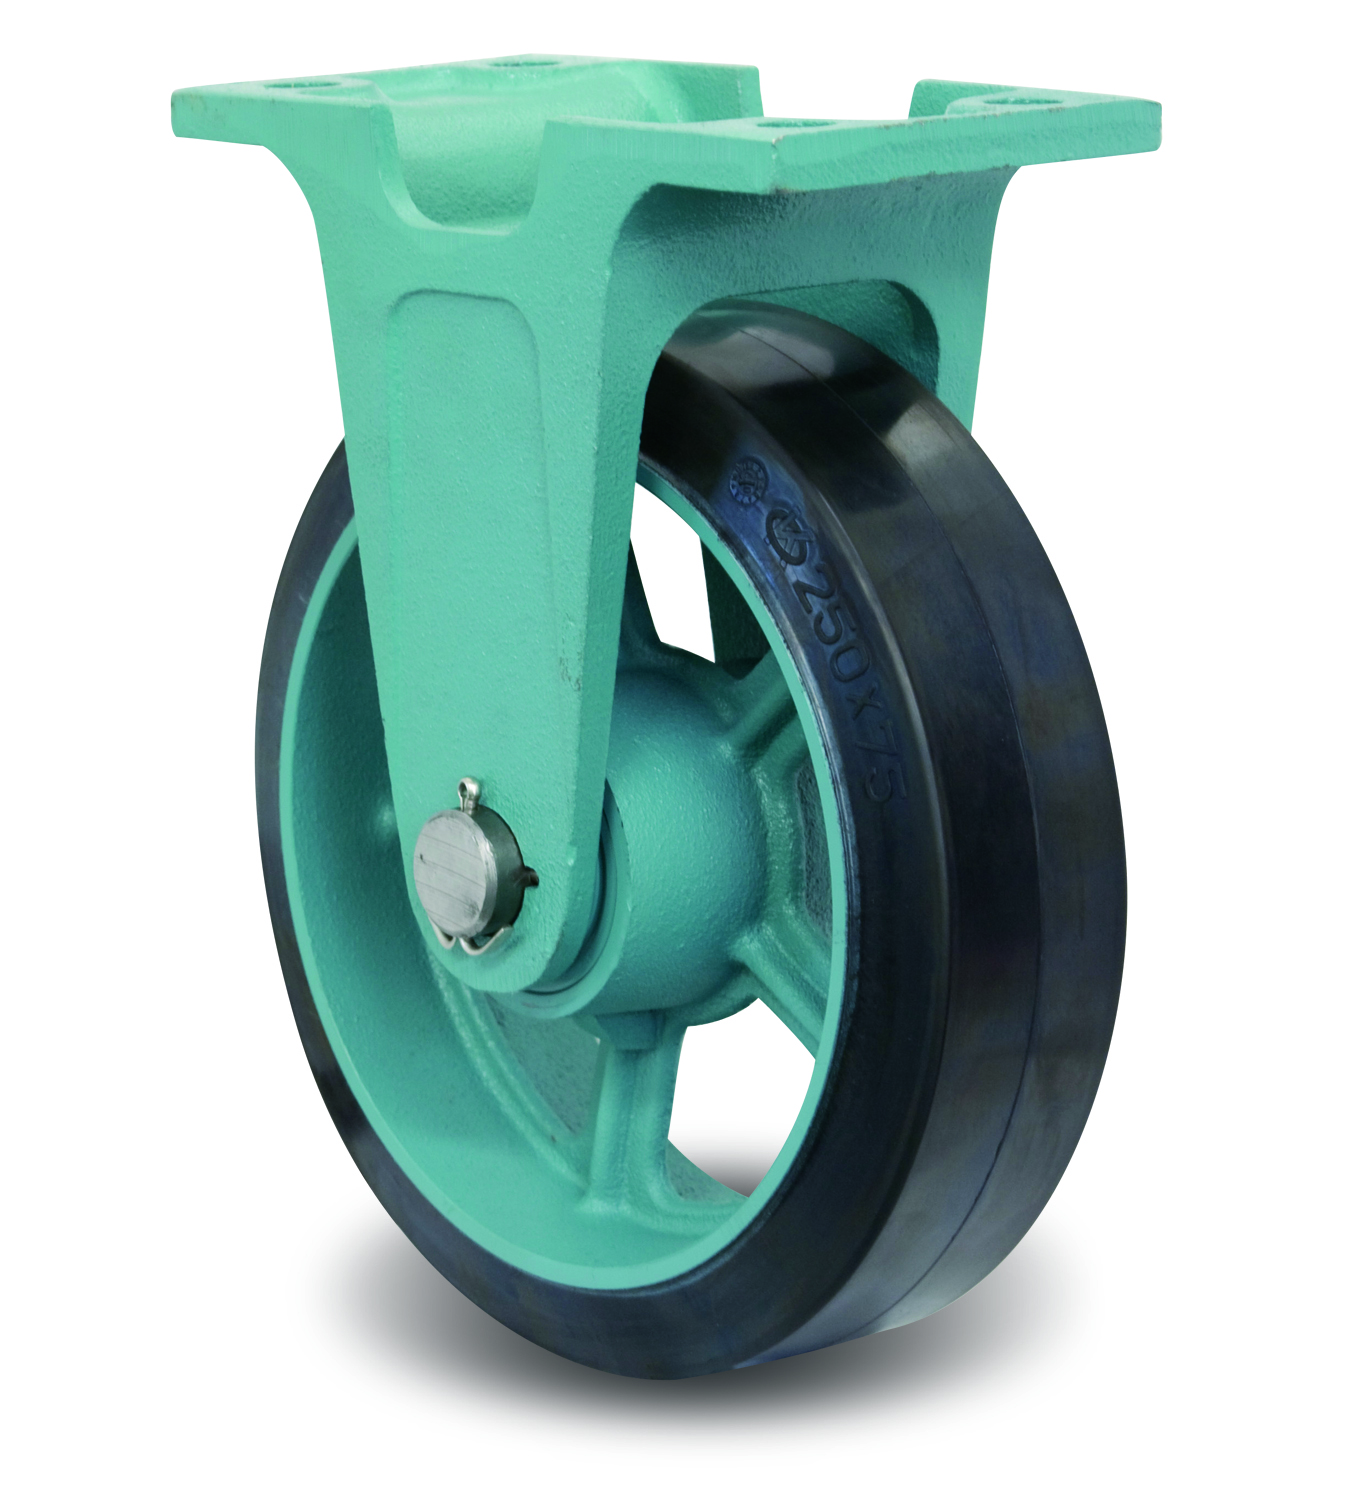 Ductile Caster Wide Type, Fixed MG-W Metal Fittings, E-MG-W (EMG-W250X90) 